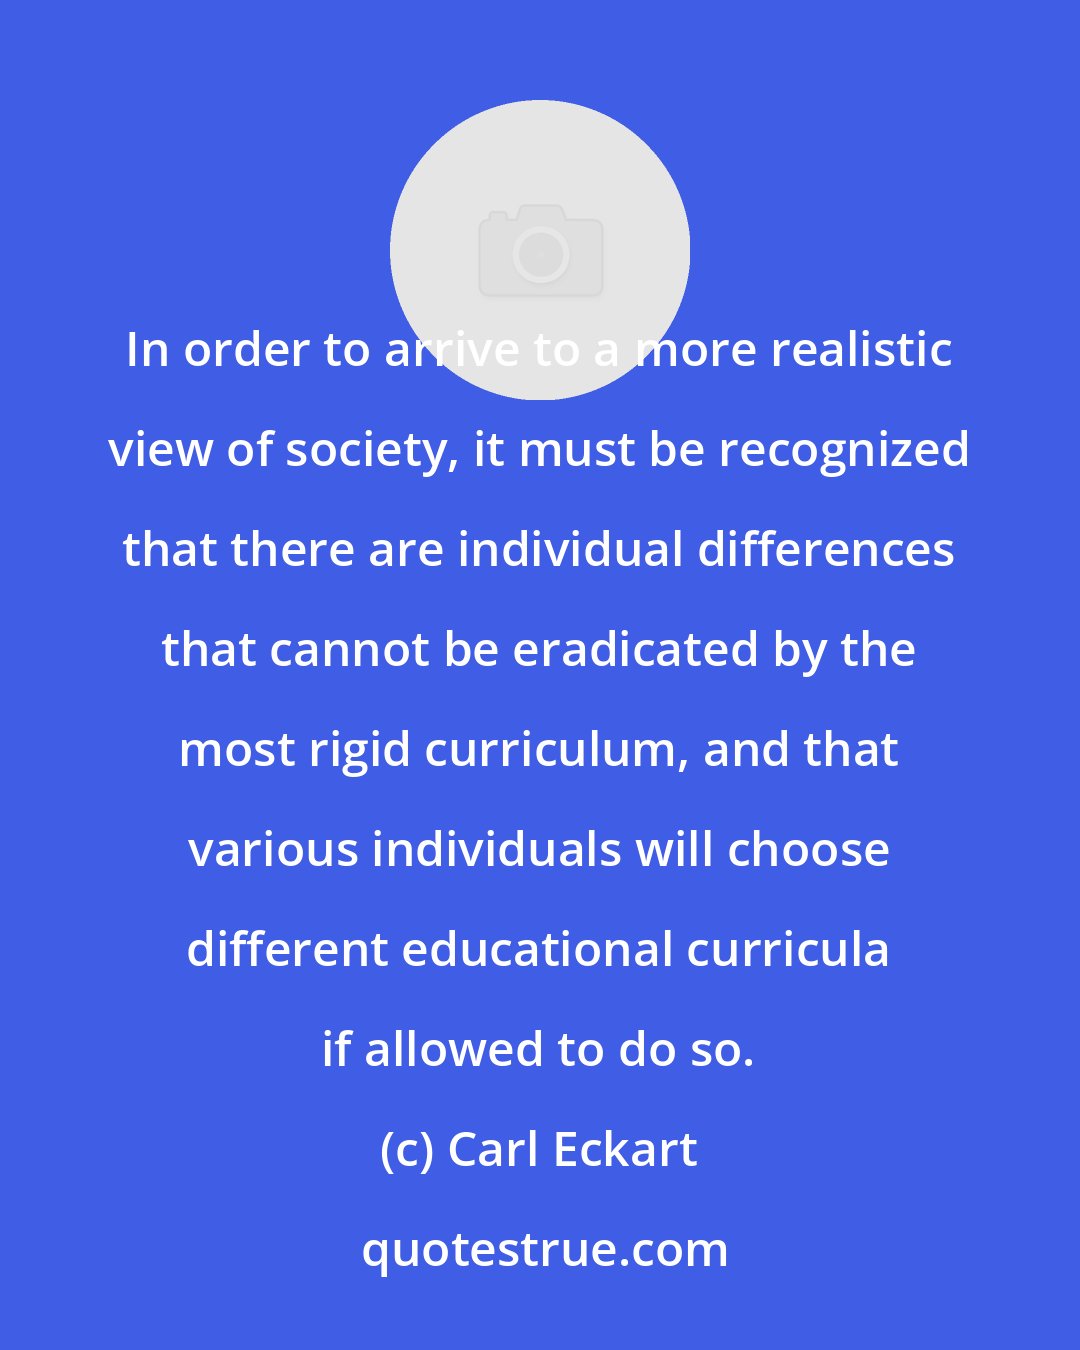 Carl Eckart: In order to arrive to a more realistic view of society, it must be recognized that there are individual differences that cannot be eradicated by the most rigid curriculum, and that various individuals will choose different educational curricula if allowed to do so.